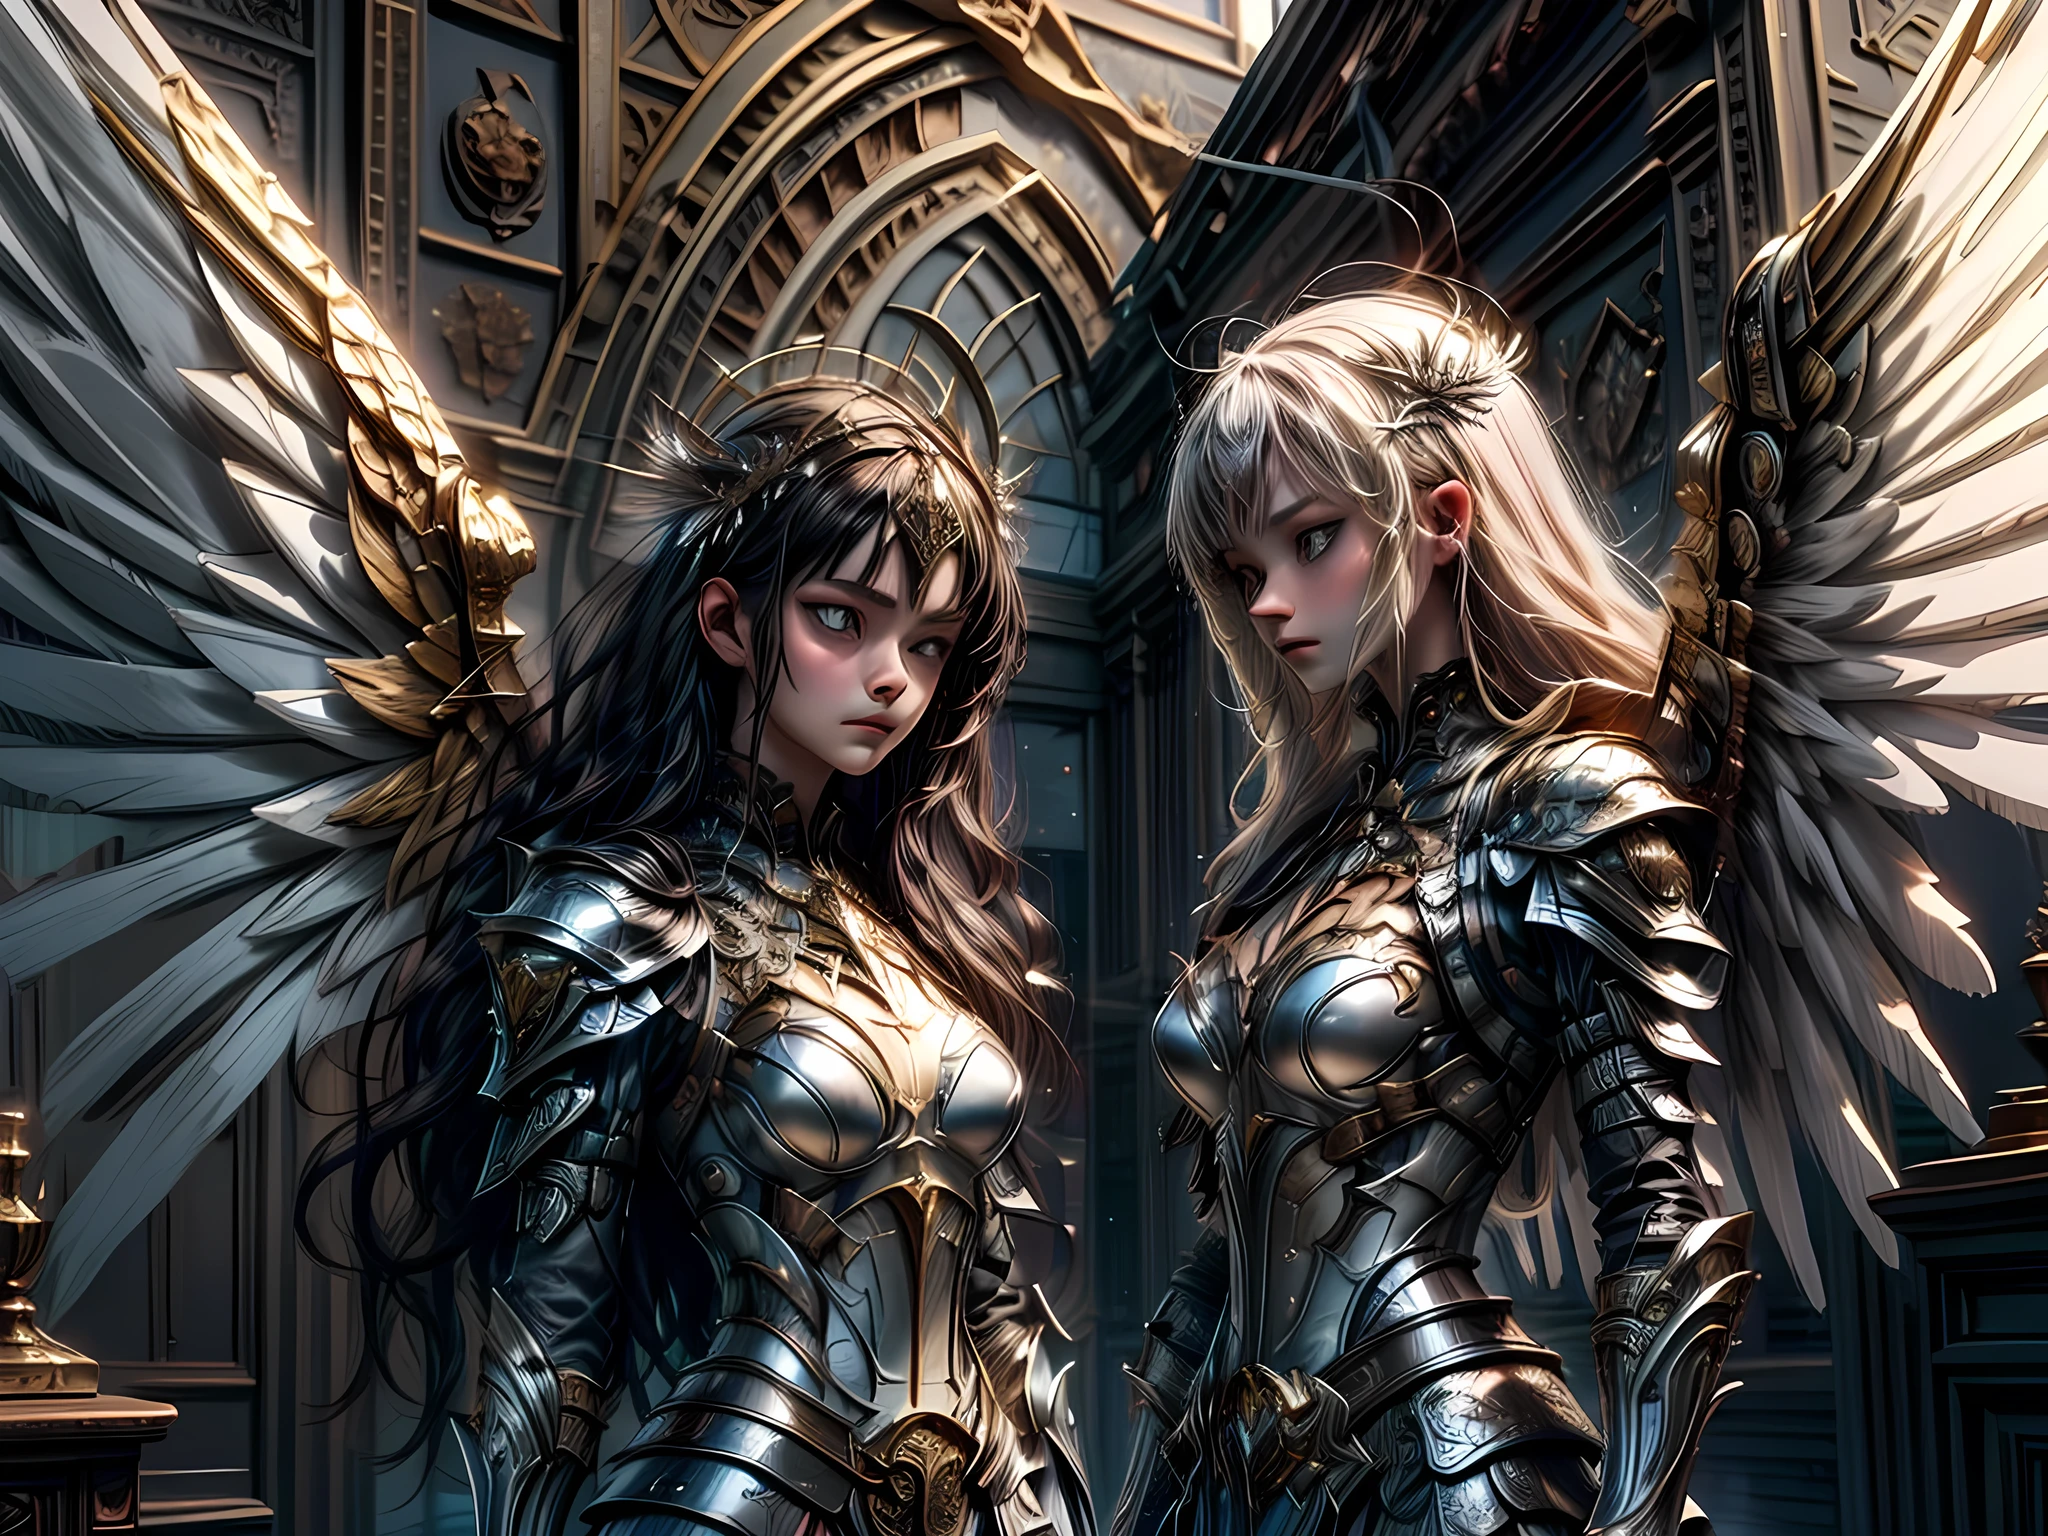 16K, ultra detailed, masterpiece, best quality, (extremely detailed), arafed, dnd art, portrait, full body, aasimar, female, (Masterpiece 1.3, intense details), female, paladin, holy warrior fighting undead (Masterpiece 1.3, intense details) large angelic wings, white angelic wings spread (Masterpiece 1.3, intense details), dark fantasy cemetery background, moon light, moon, stars, clouds, wearing (white: 1.1)  armor (Masterpiece 1.3, intense details), holy symbol, armed with sword, short blond hair,  detailed face, (Masterpiece 1.5, best quality), anatomically correct (Masterpiece 1.3, intense details), angel_wings, determined face, god rays, cinematic lighting, glowing light, silhouette, from outside, photorealism, panoramic view  (Masterpiece 1.3, intense details) , Wide-Angle, Ultra-Wide Angle, 8k, highres, best quality, high details, armored dress